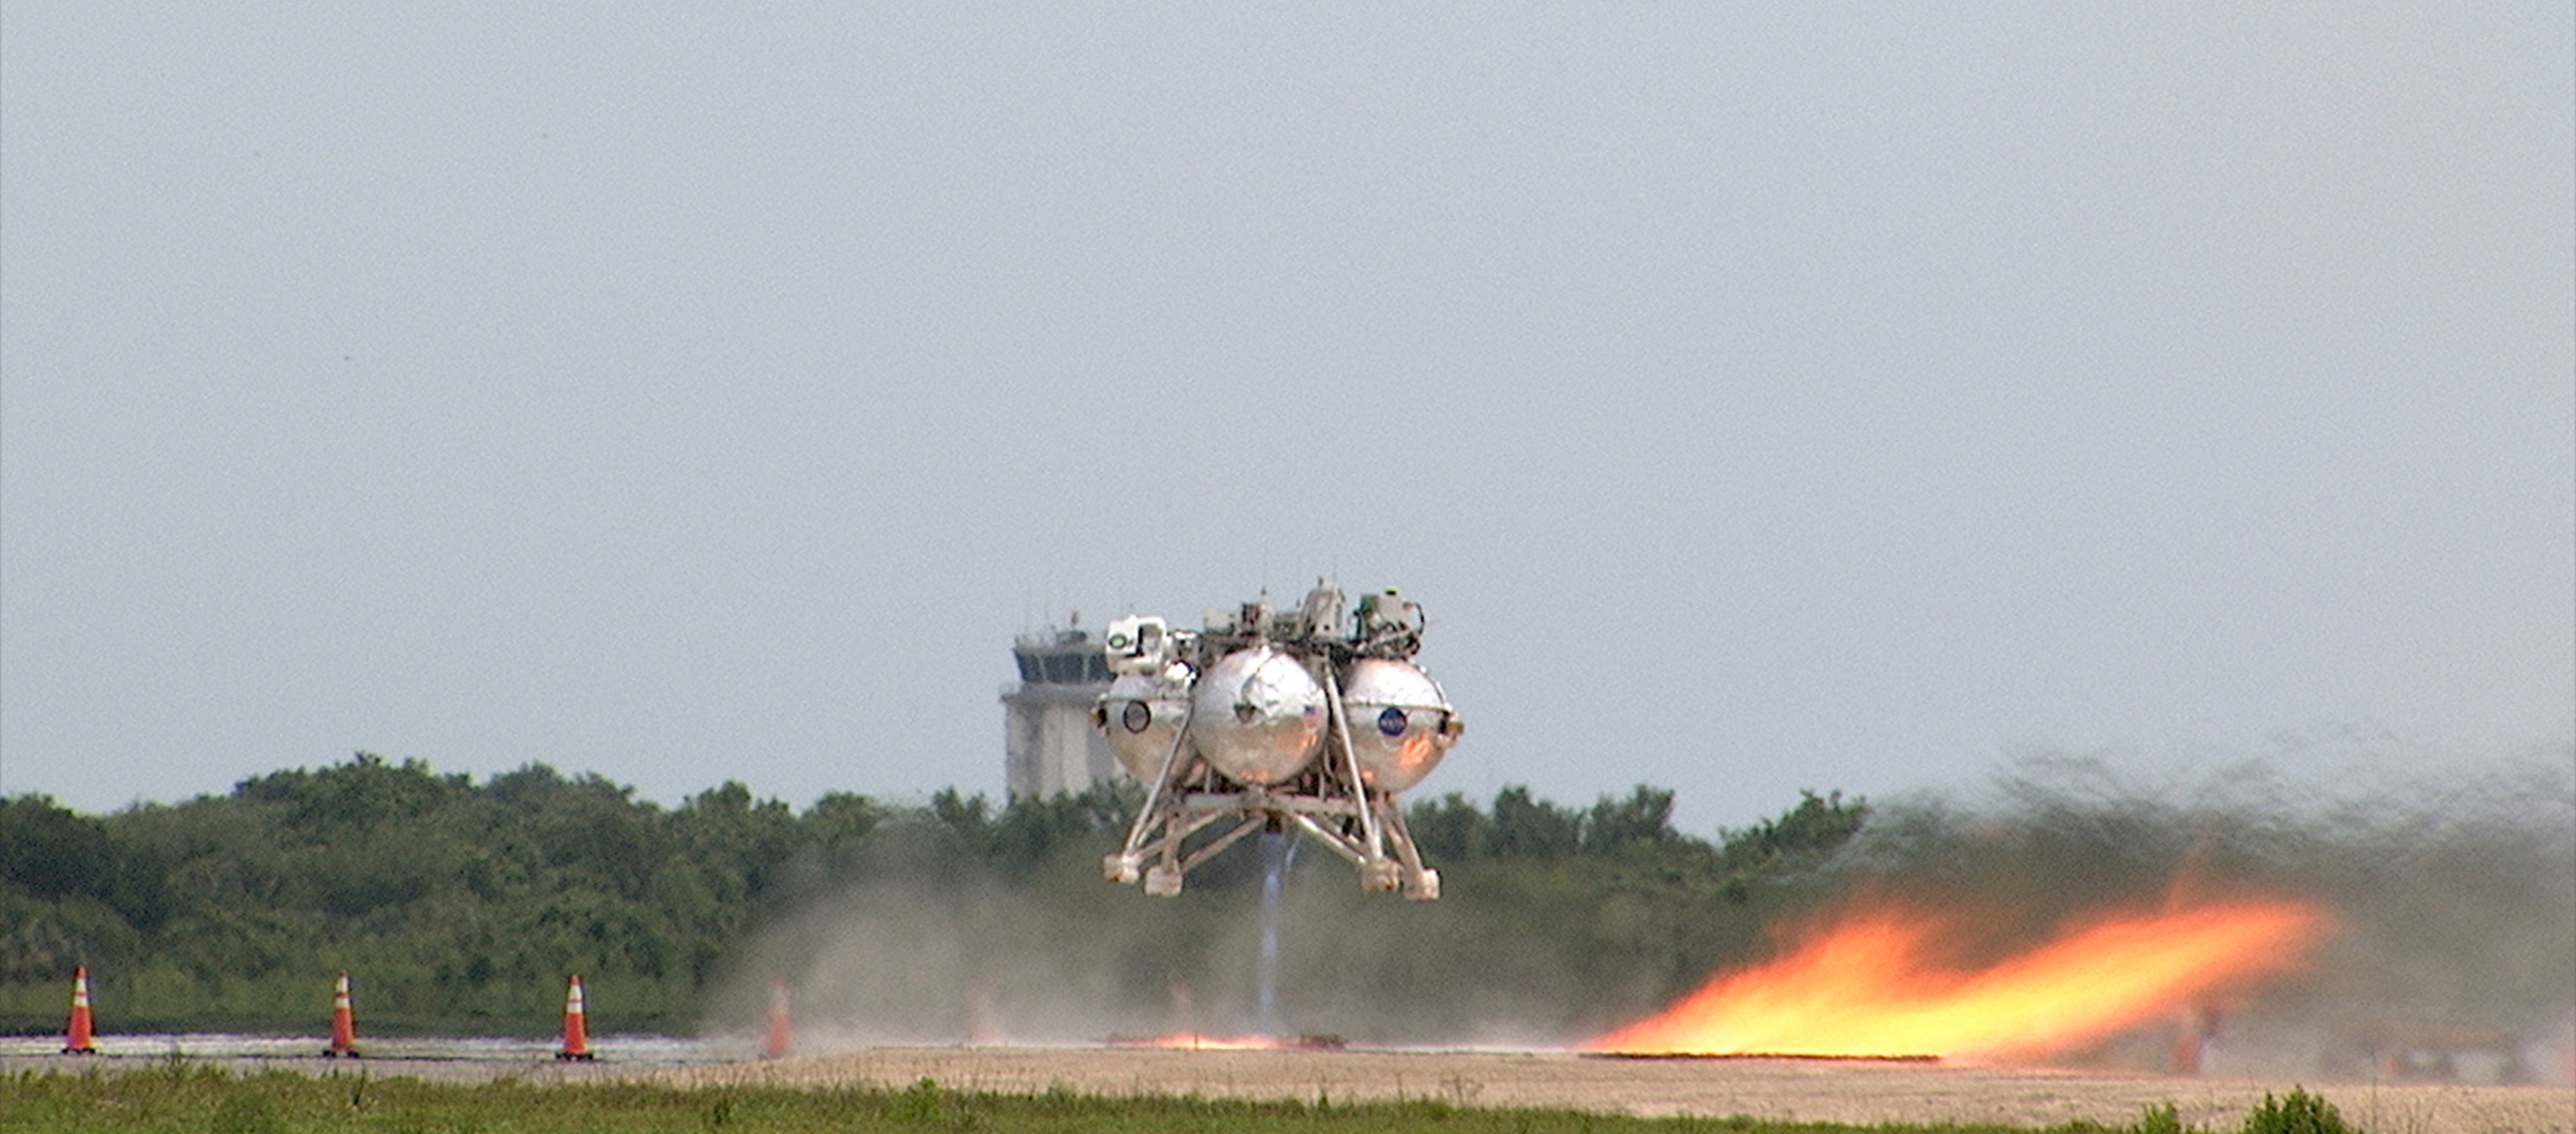 Morpheus lifts off on a 98-second, free-flight test on April 30, 2014. It ascended more than 800 feet at a speed of 36 mph, surveyed the hazard field, then flew forward and downward covering approximately 1300 feet while performing a 78-foot divert before coming to rest inside the hazard field. Credit: NASA/Frankie Martin